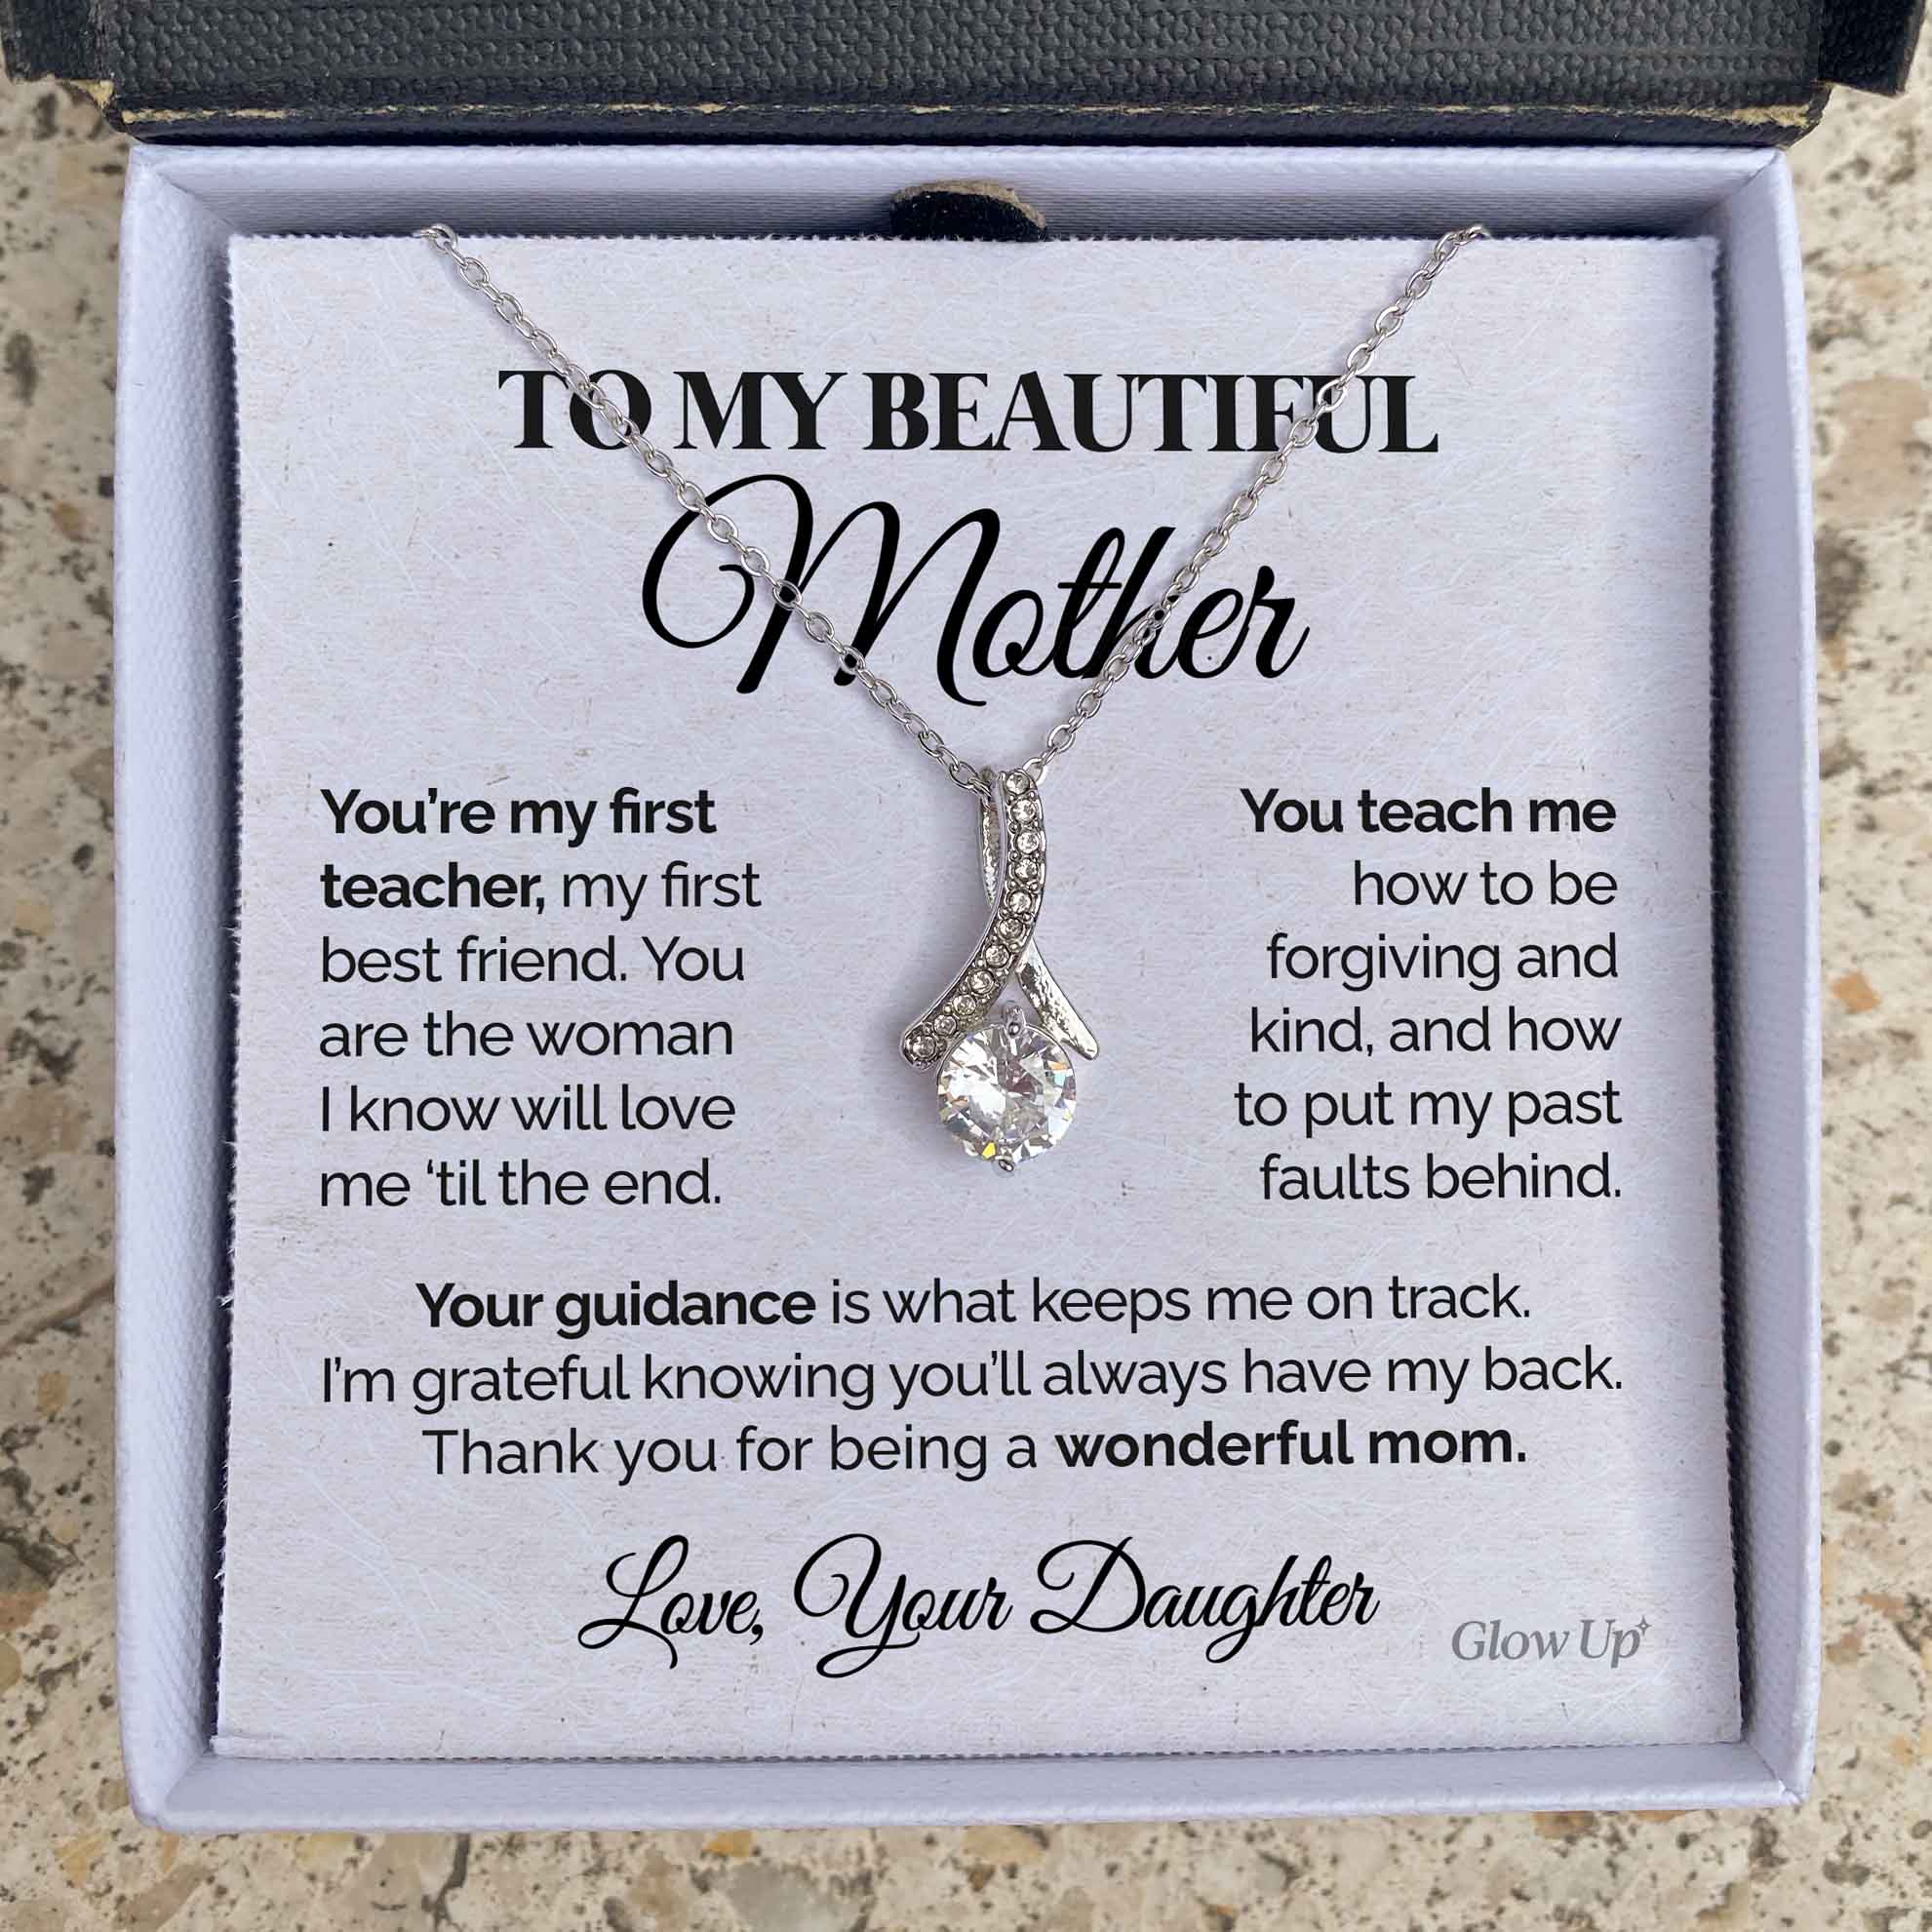 ShineOn Fulfillment Jewelry Two Toned Box To my Beautiful Mother - You're my first teacher - Ribbon Necklace